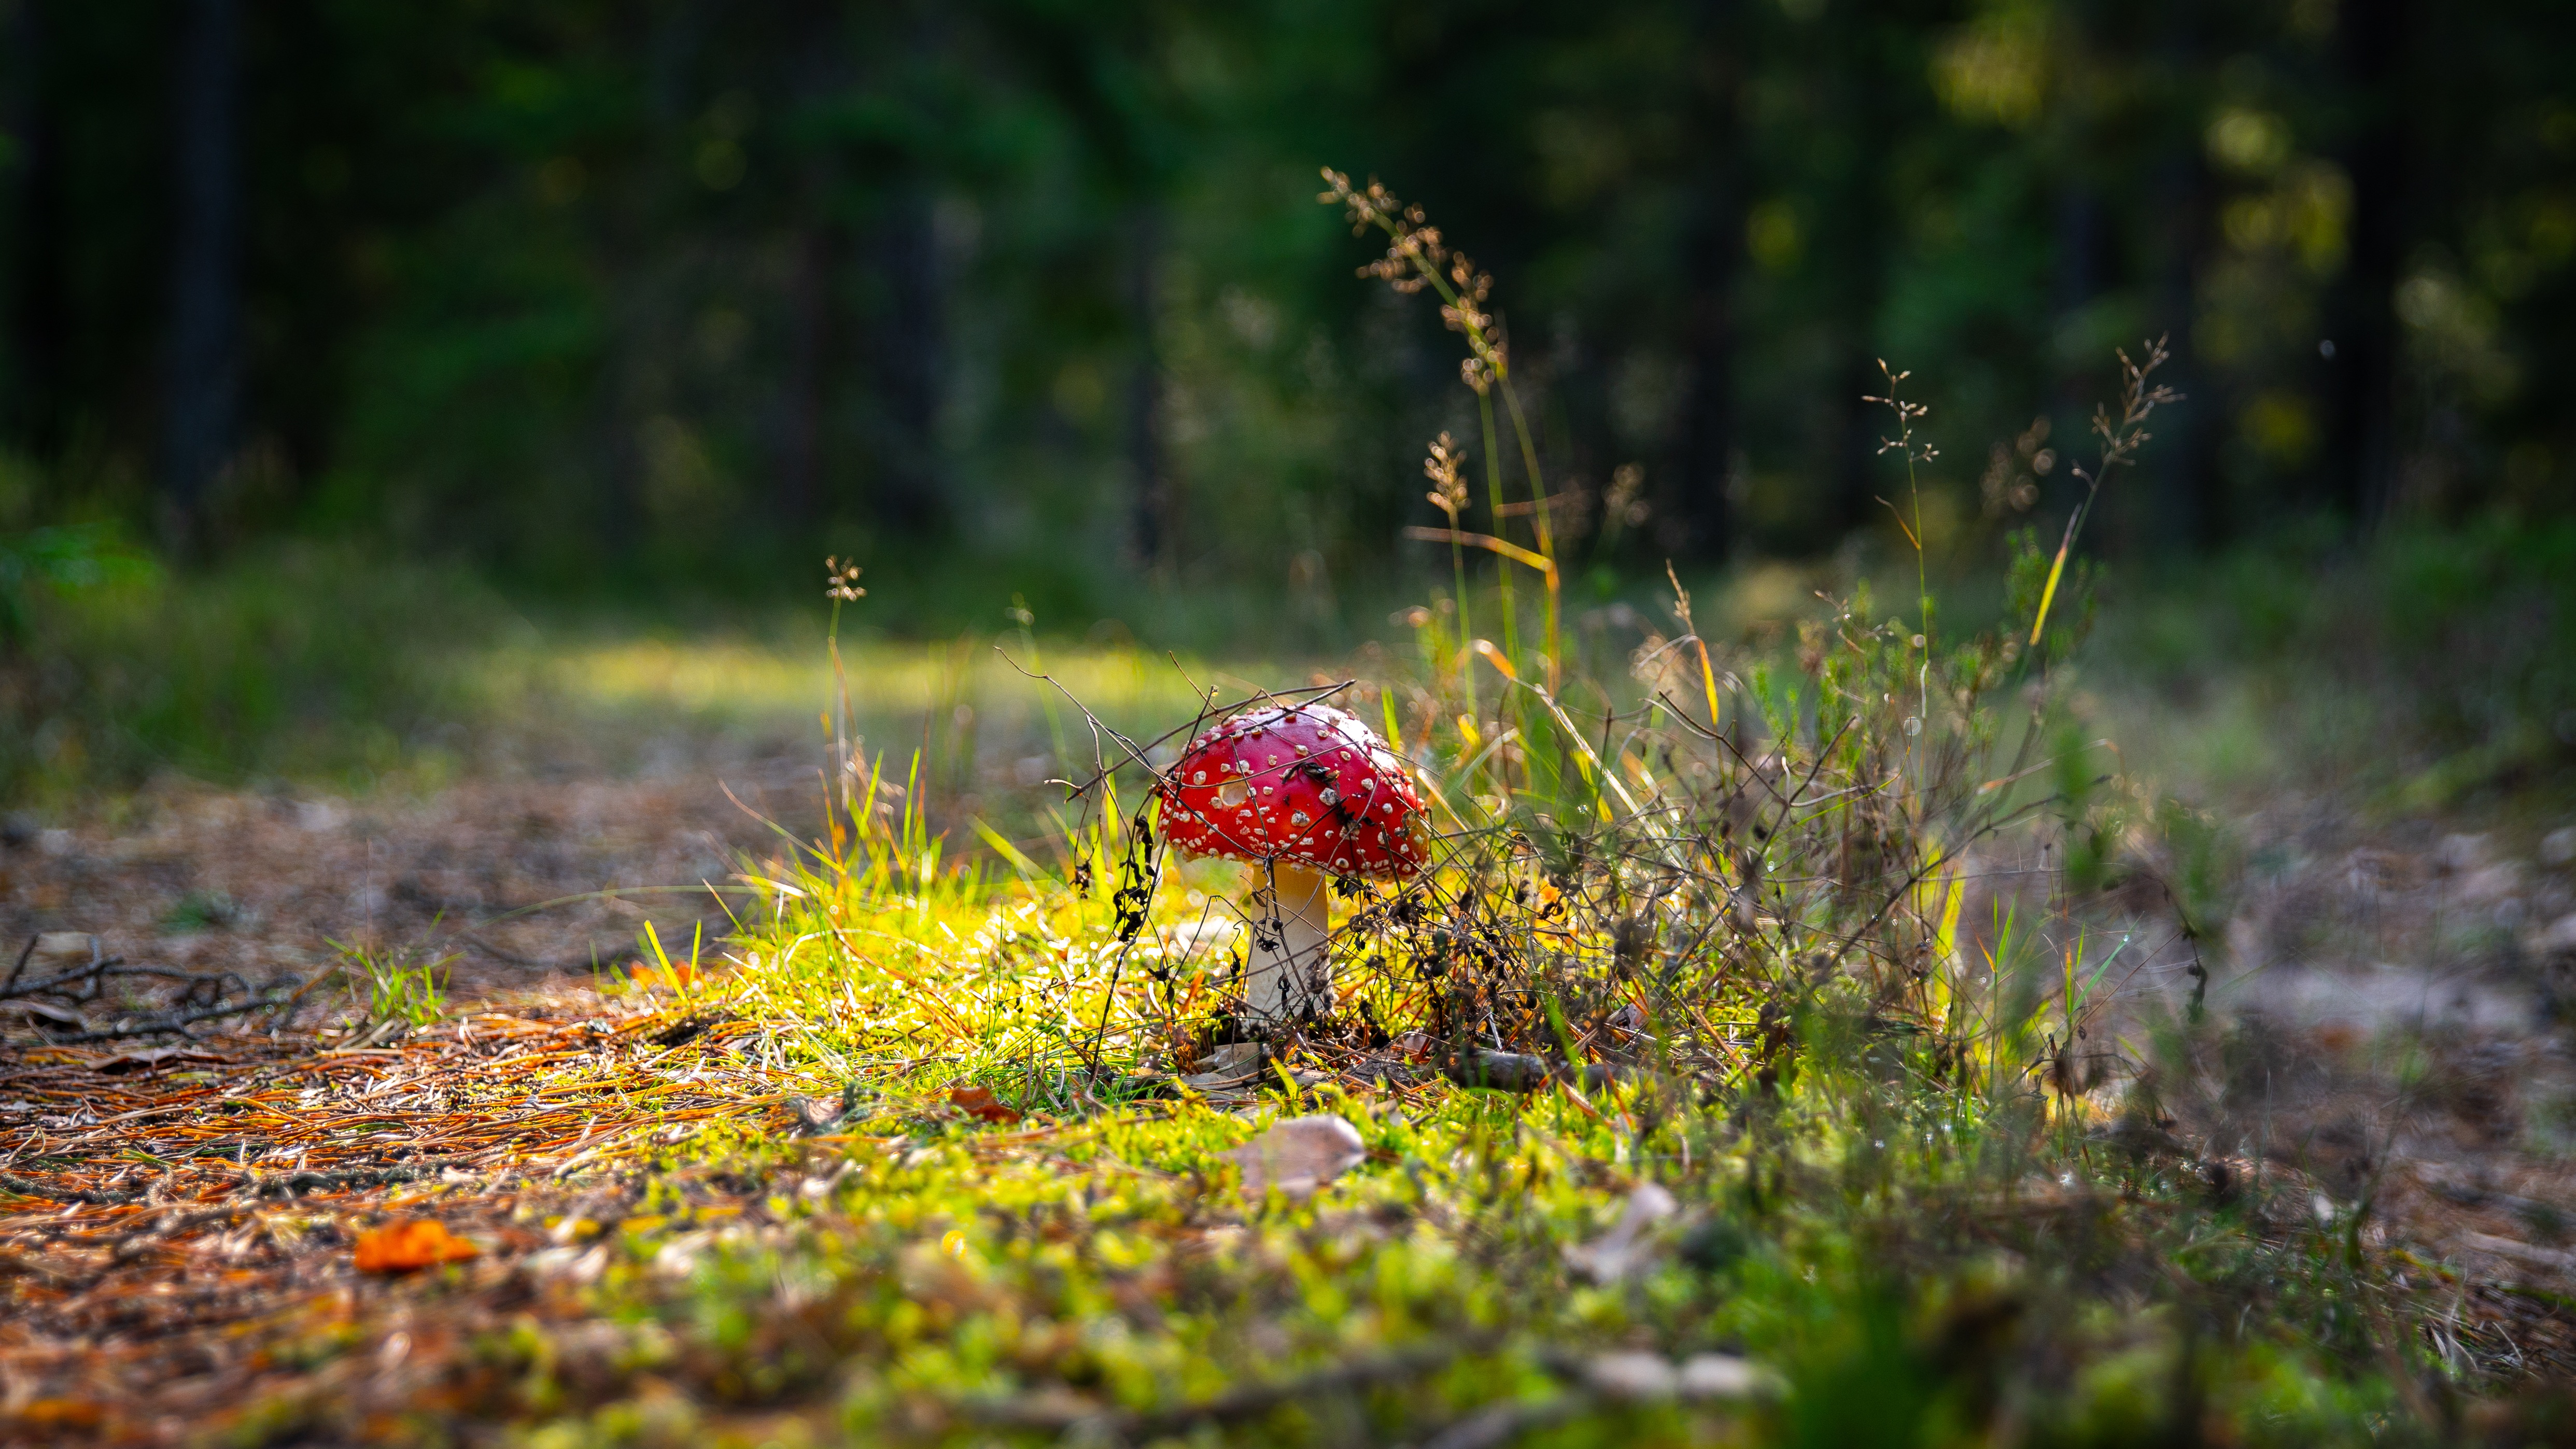 mushroom, autumn, nature, grass, forest, fly agaric